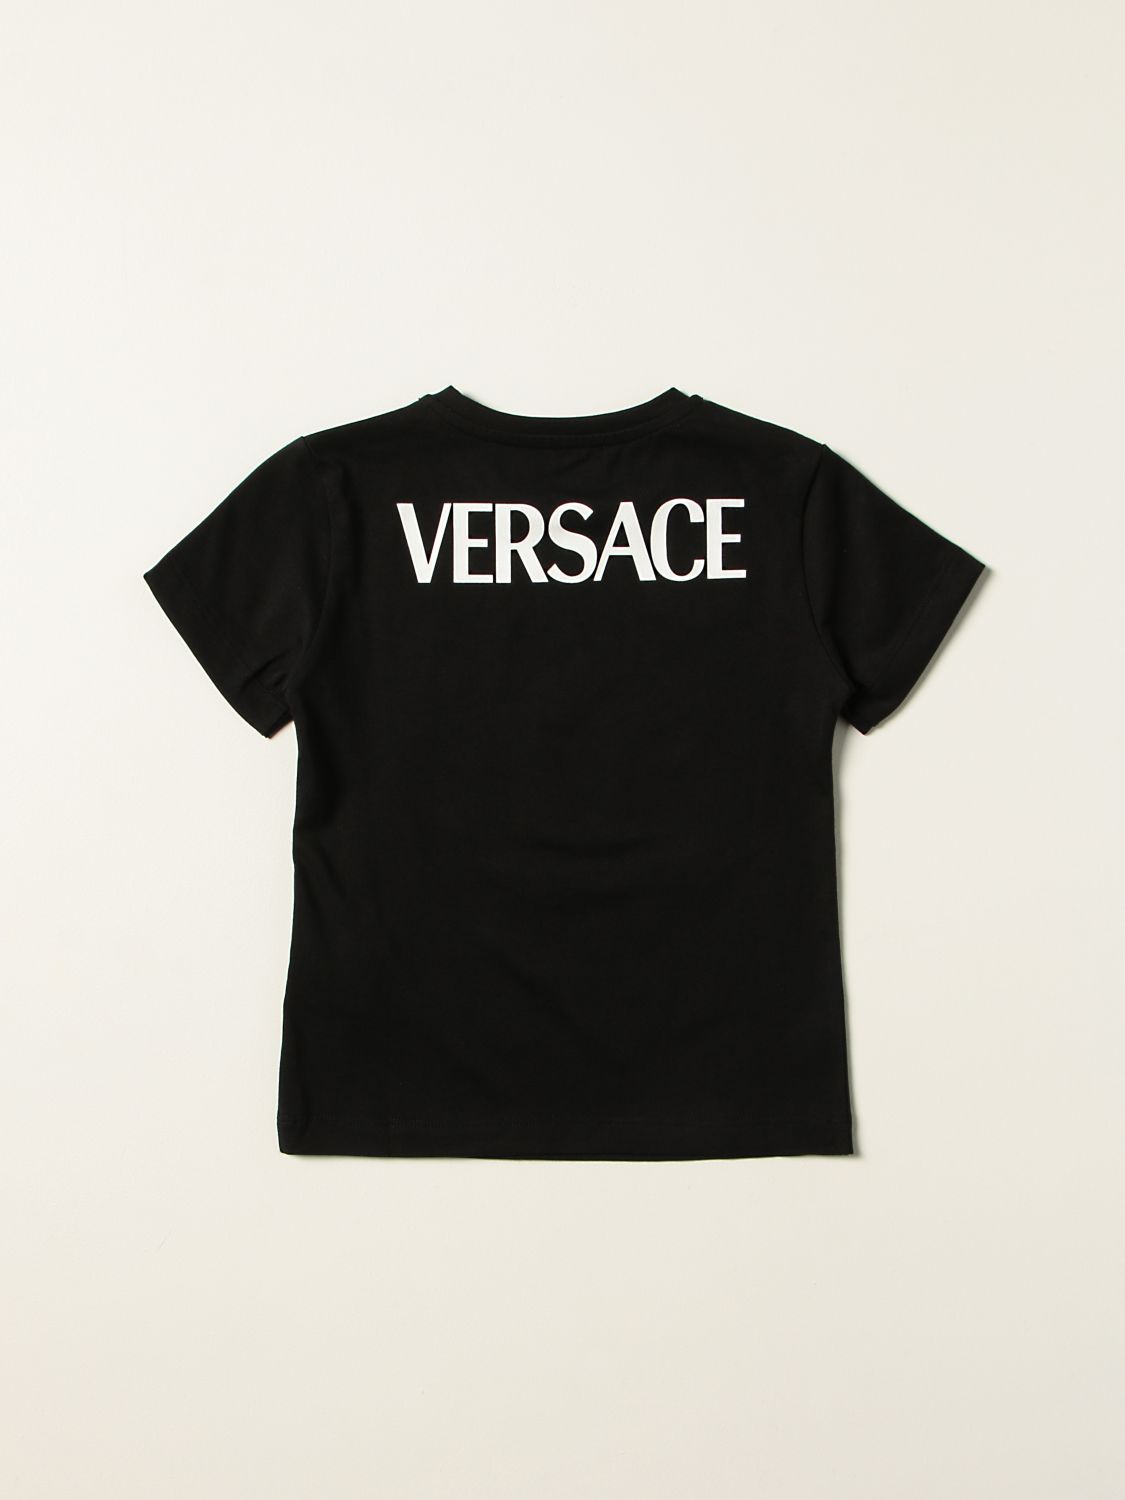 T恤 Young Versace: T恤 儿童 Versace Young 黑色 2